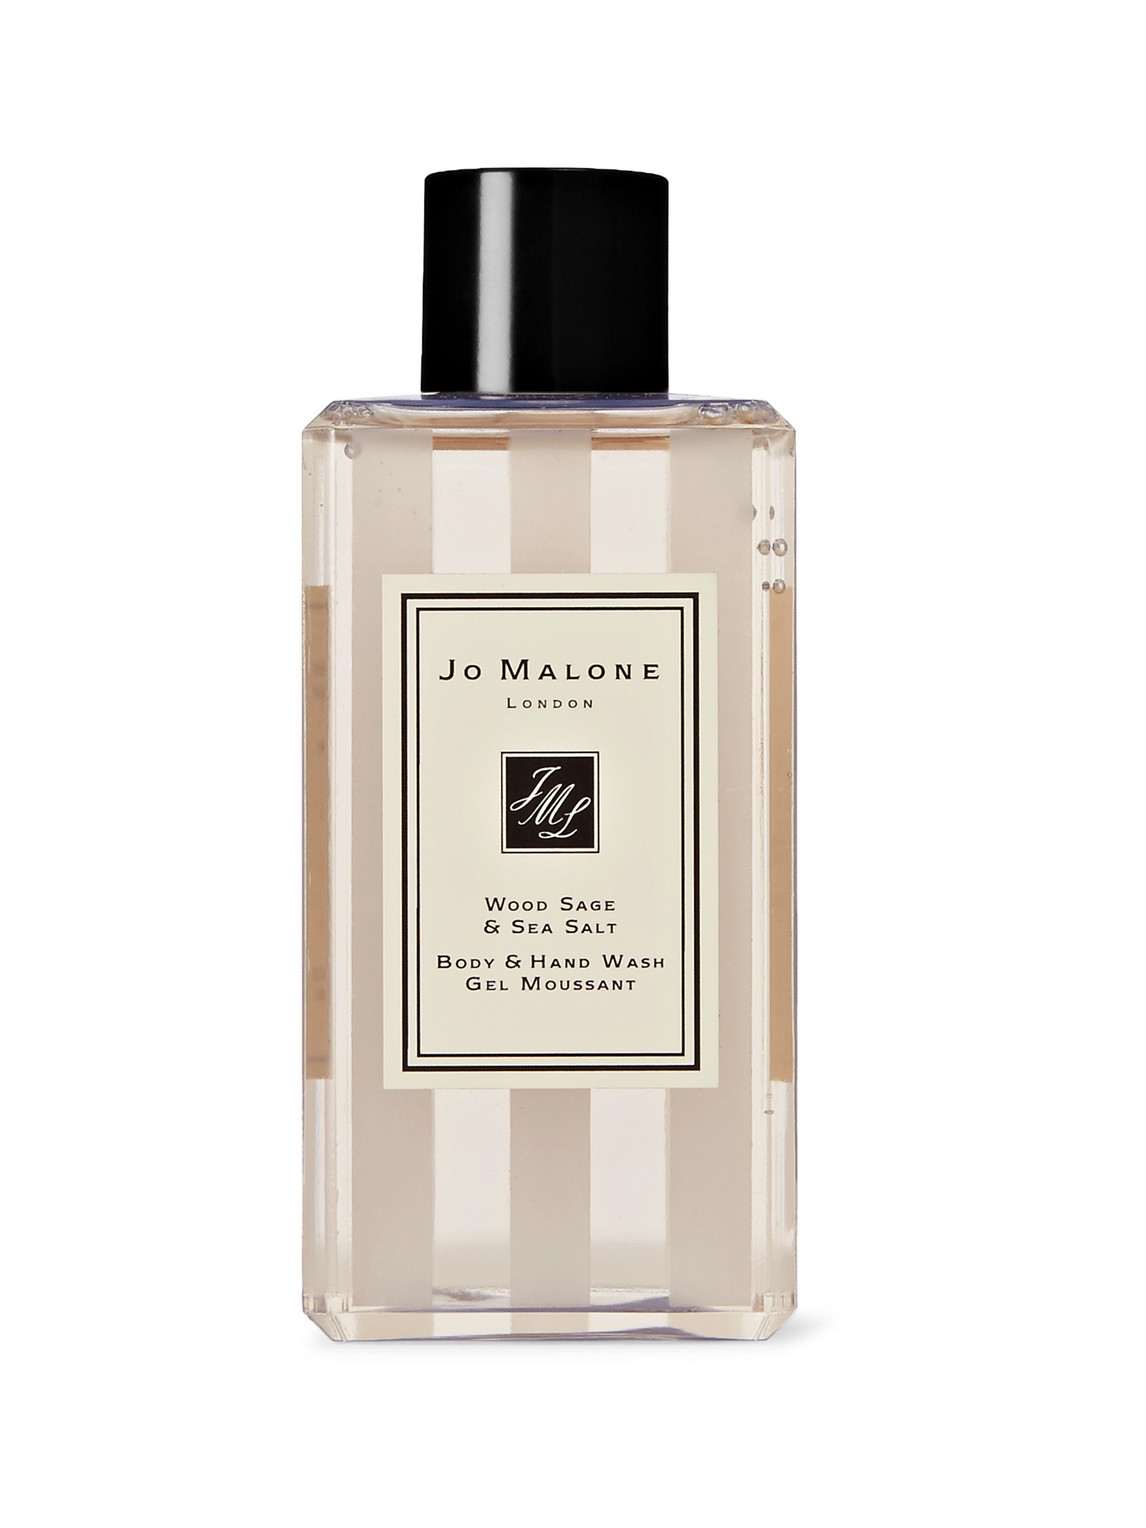 Jo Malone London Wood Sage And Sea Salt Body & Hand Wash, 100ml In Colorless